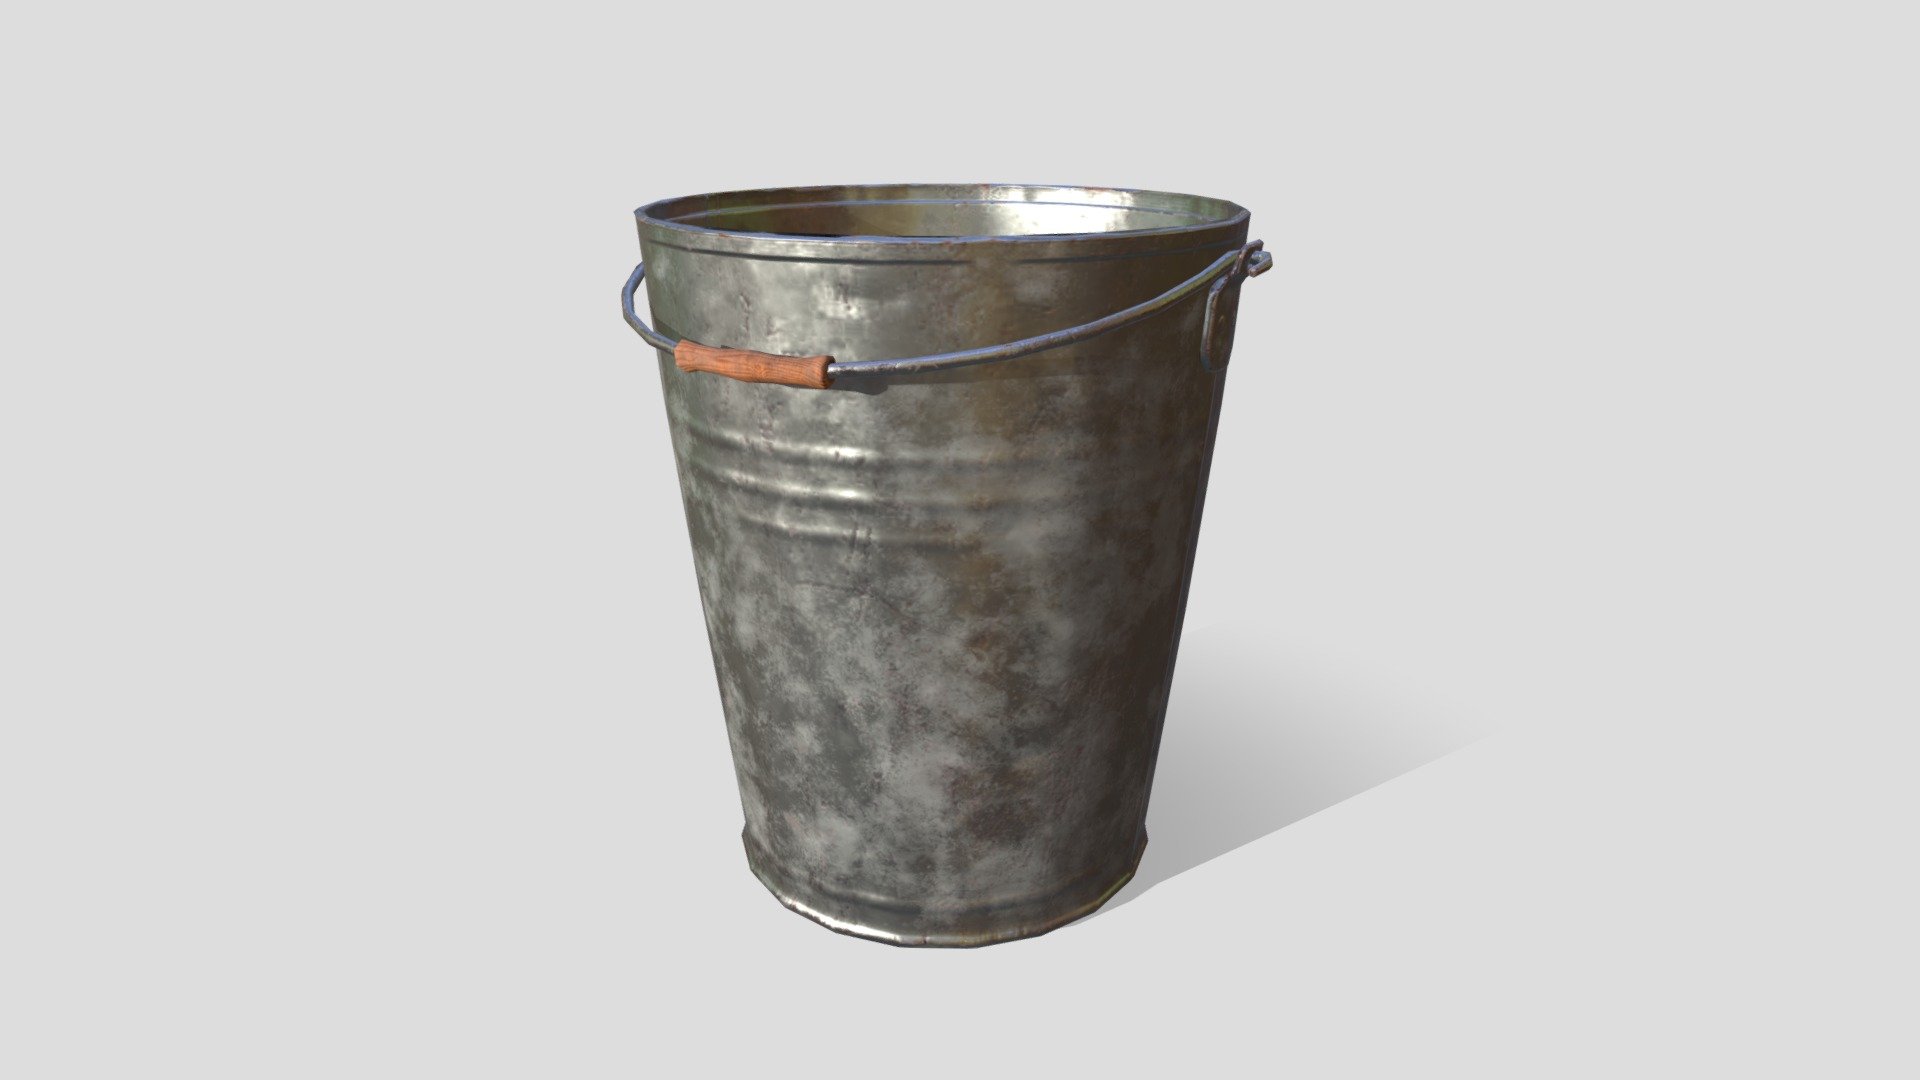 Galvanised steel bucket, modelled in Maya, sculpted in Zbrush and textured entirely in Substance Painter 3d model